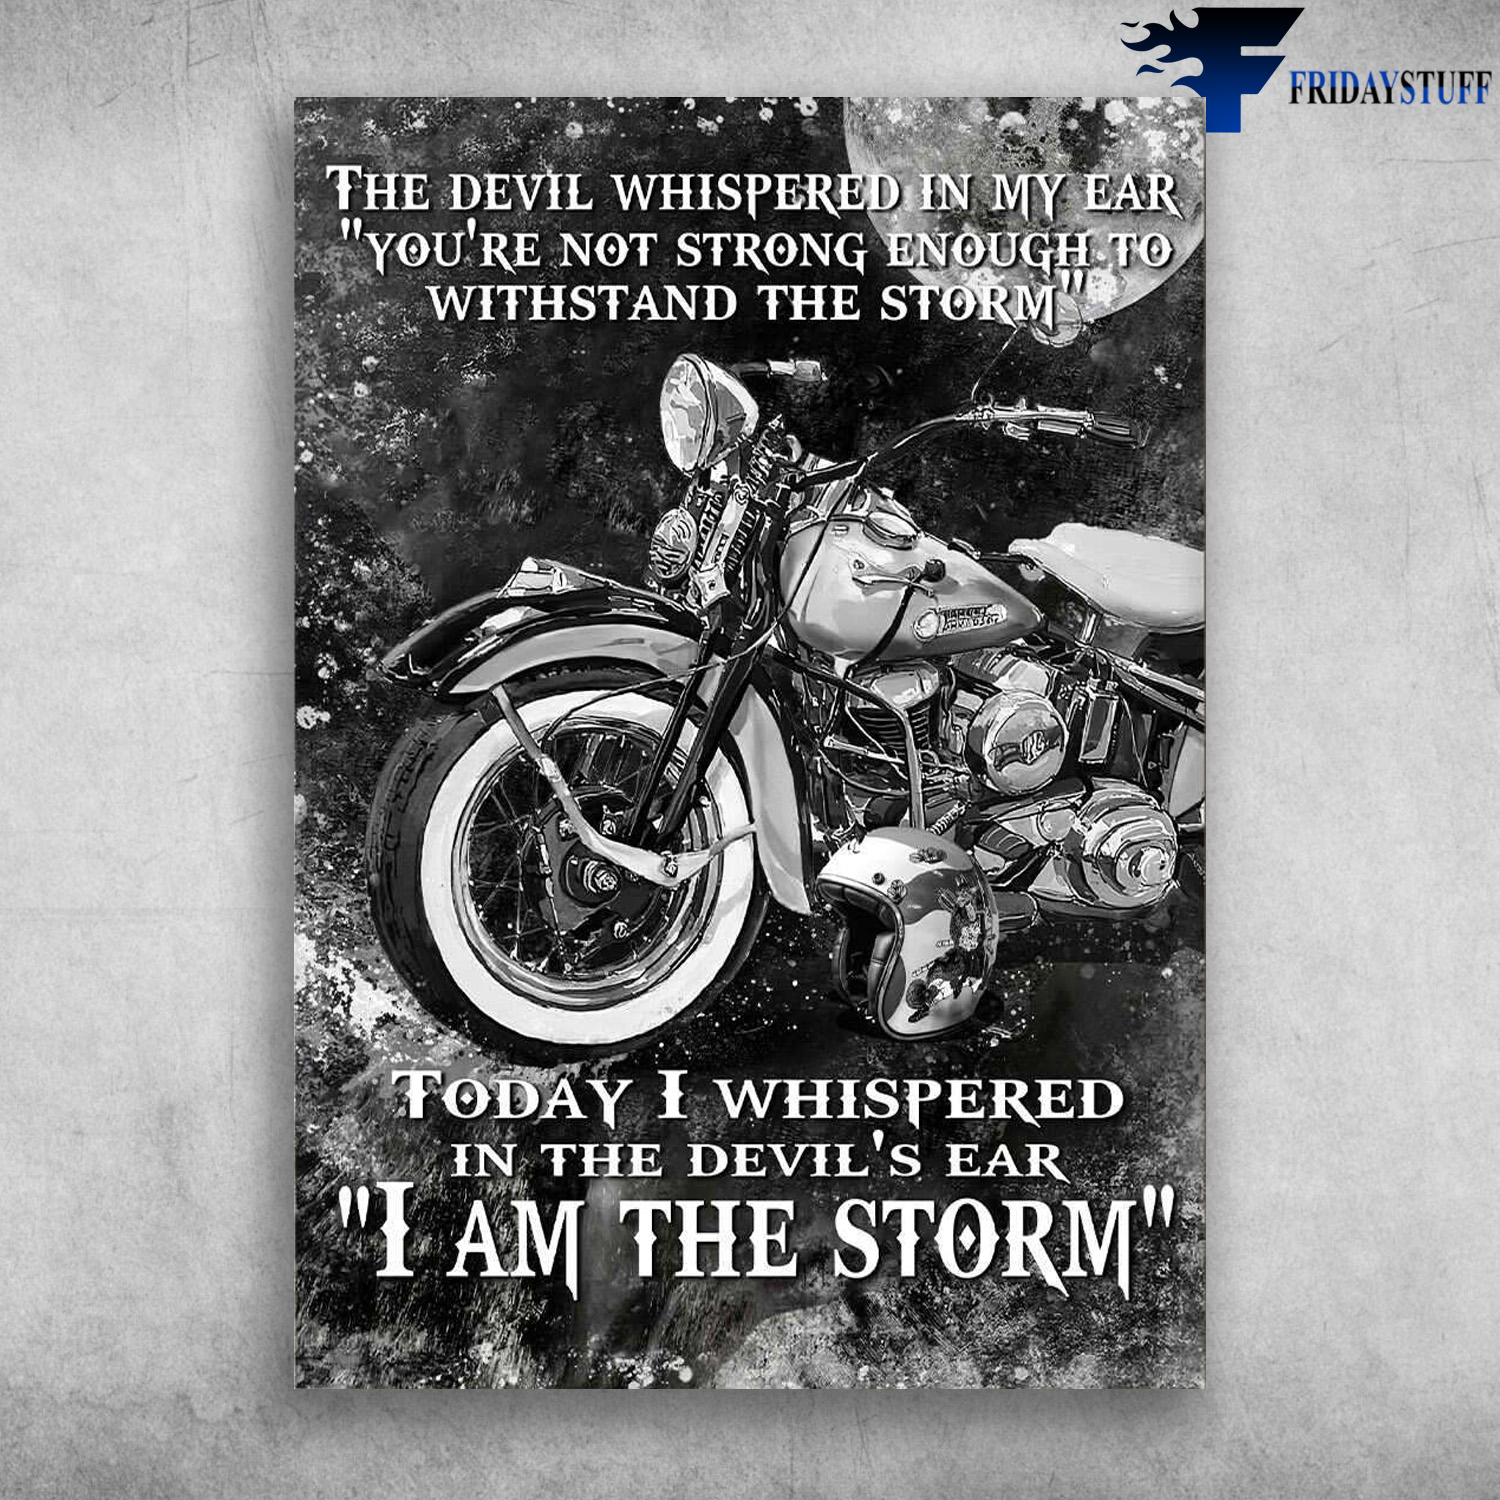 Motorcycle Lover, Motorcycle Moon - The Devil Whispered My Ear, You’re Not Strong, Enough To Withstand The Storm, Today I Whispered In The Devils Ear, I Am The Storm